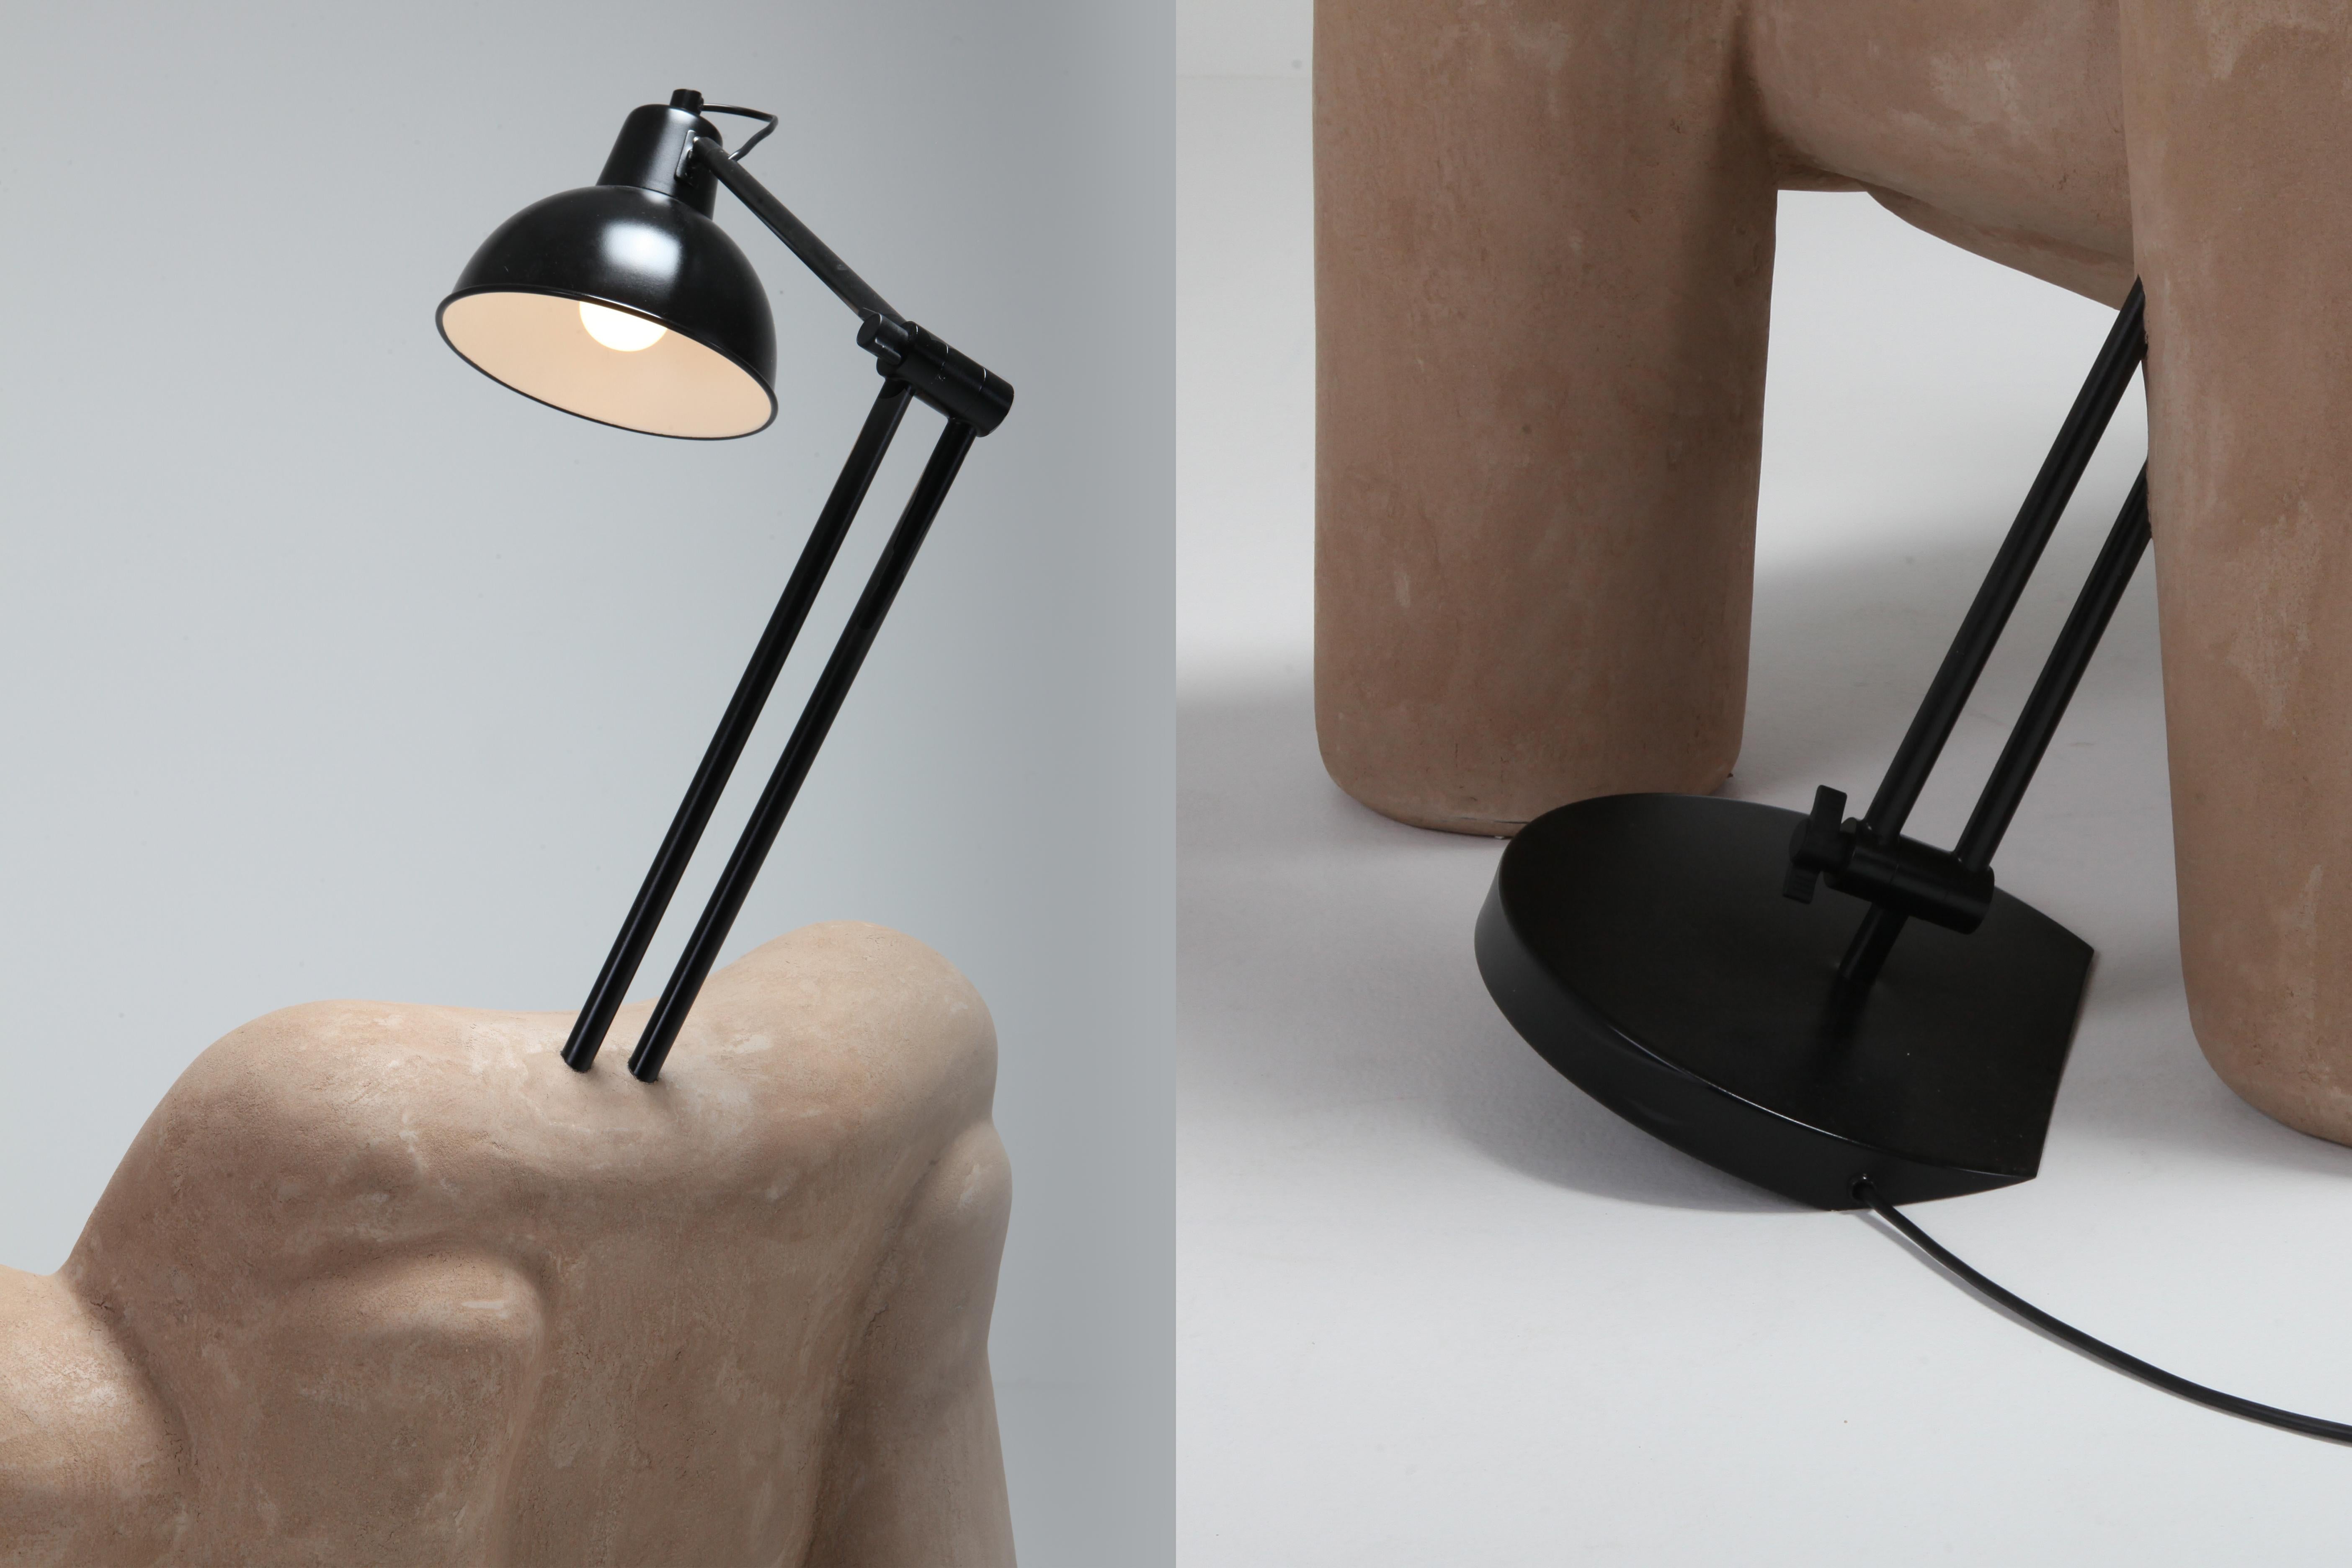 'Blown-Up with Lamp' by Schimmel & Schweikle in Vegan Leather Coating 1